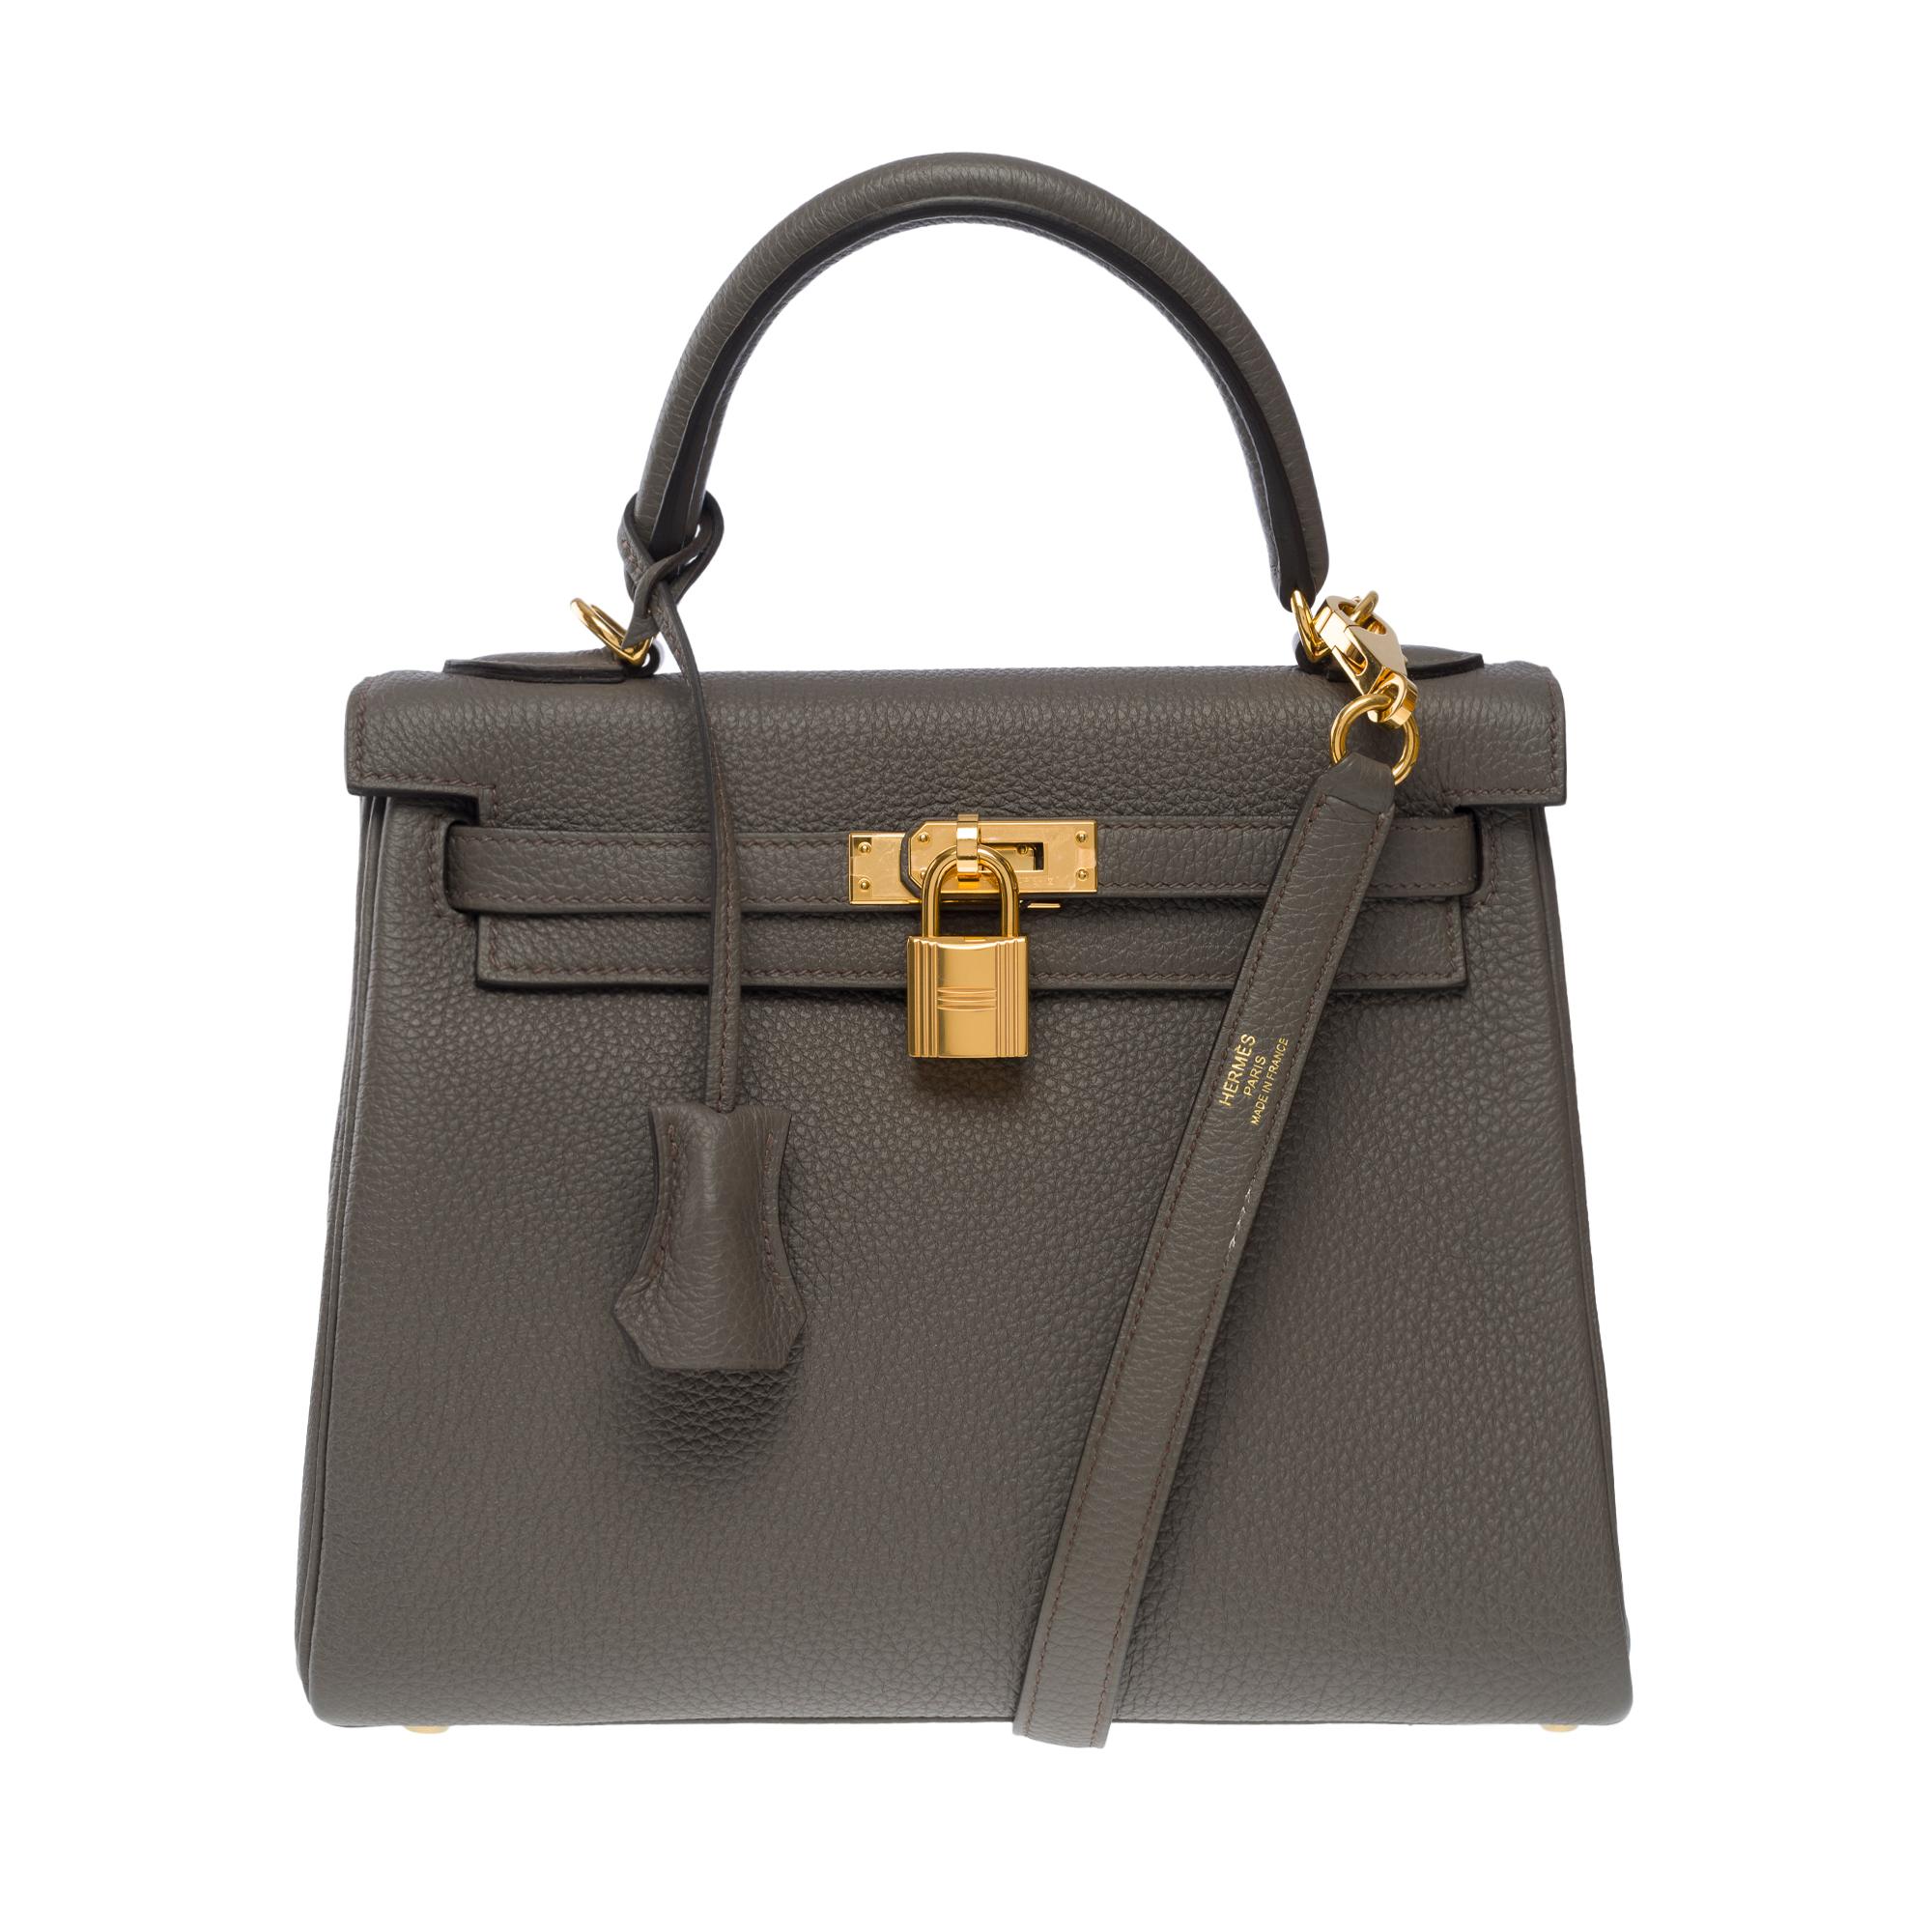 Amazing Hermes Kelly 25 retourne handbag strap in Togo grey Etain leather , gold plated metal hardware, simple handle in togo etain leather, a removable shoulder strap in togo grey etain leather for a hand or shoulder carry

Flap closure
Inner